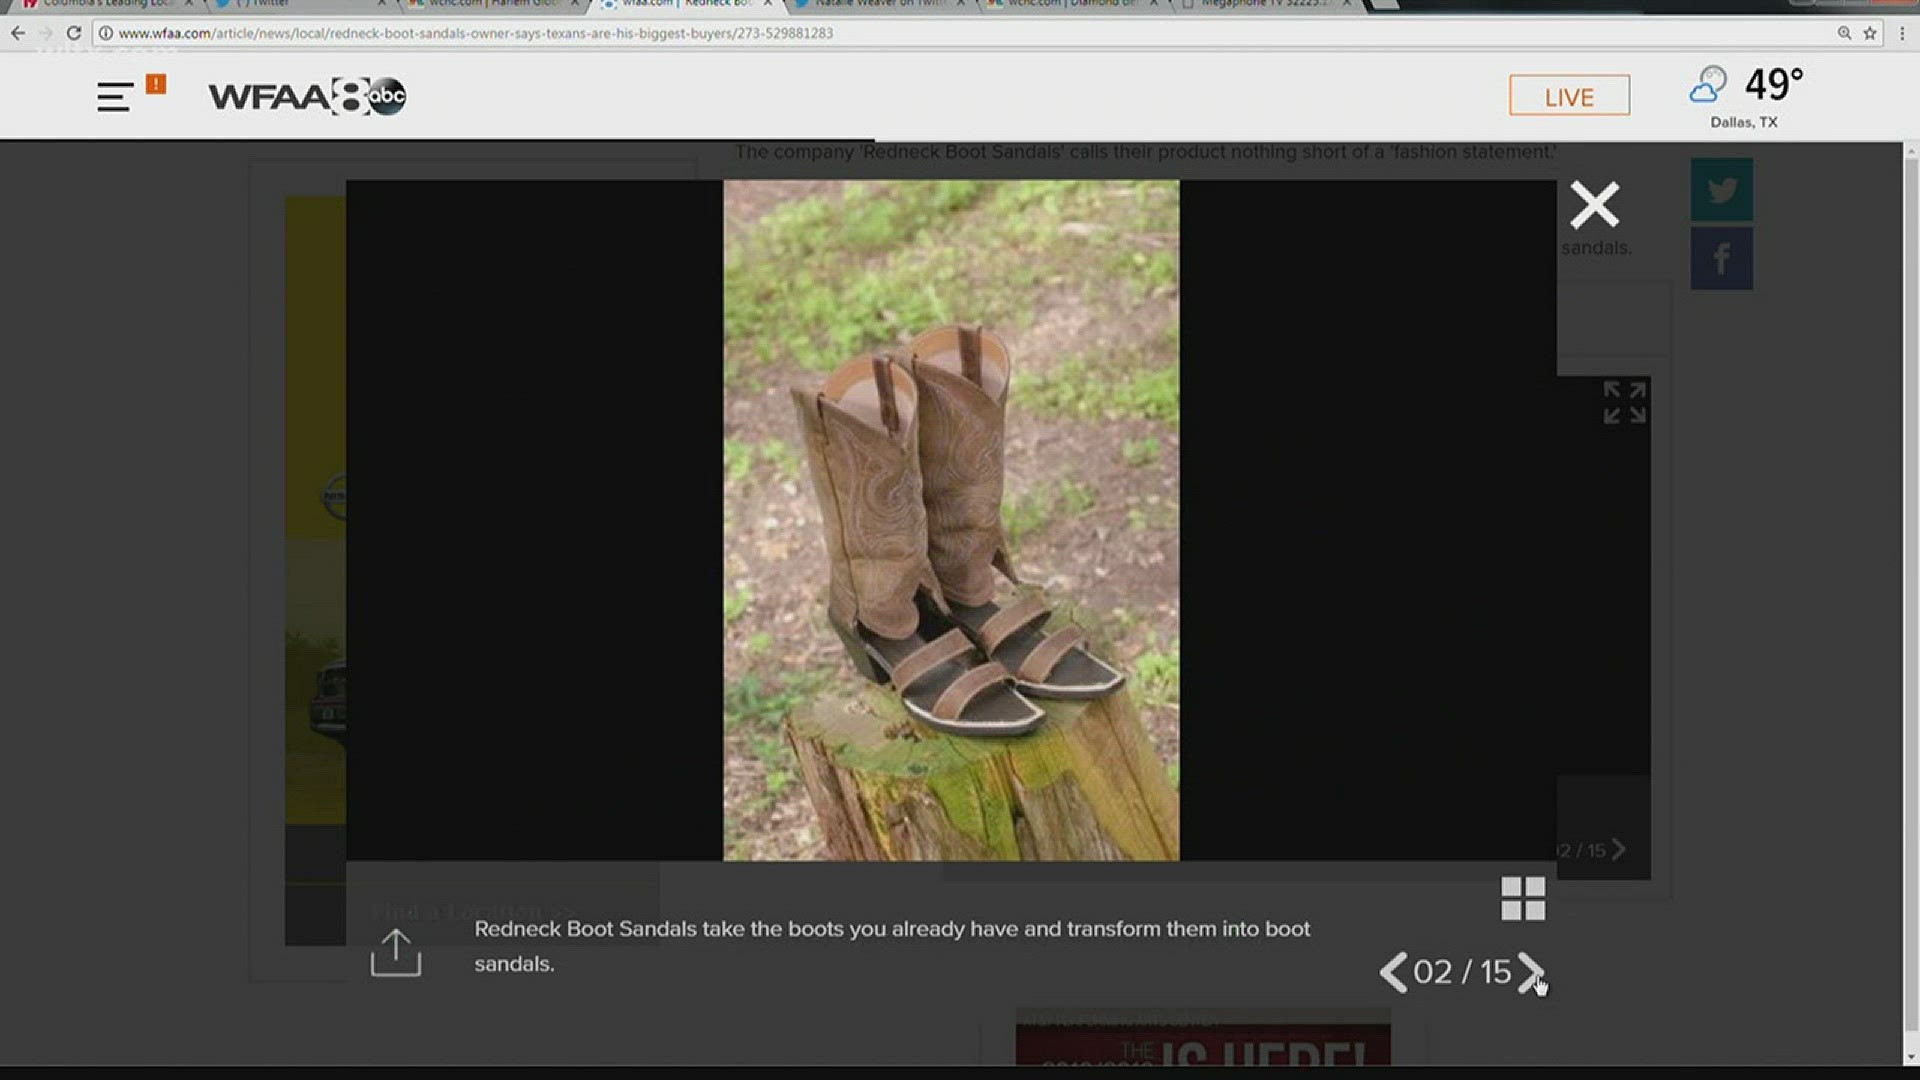 The Missouri-based company takes the boots you already have and transforms them into boot sandals.